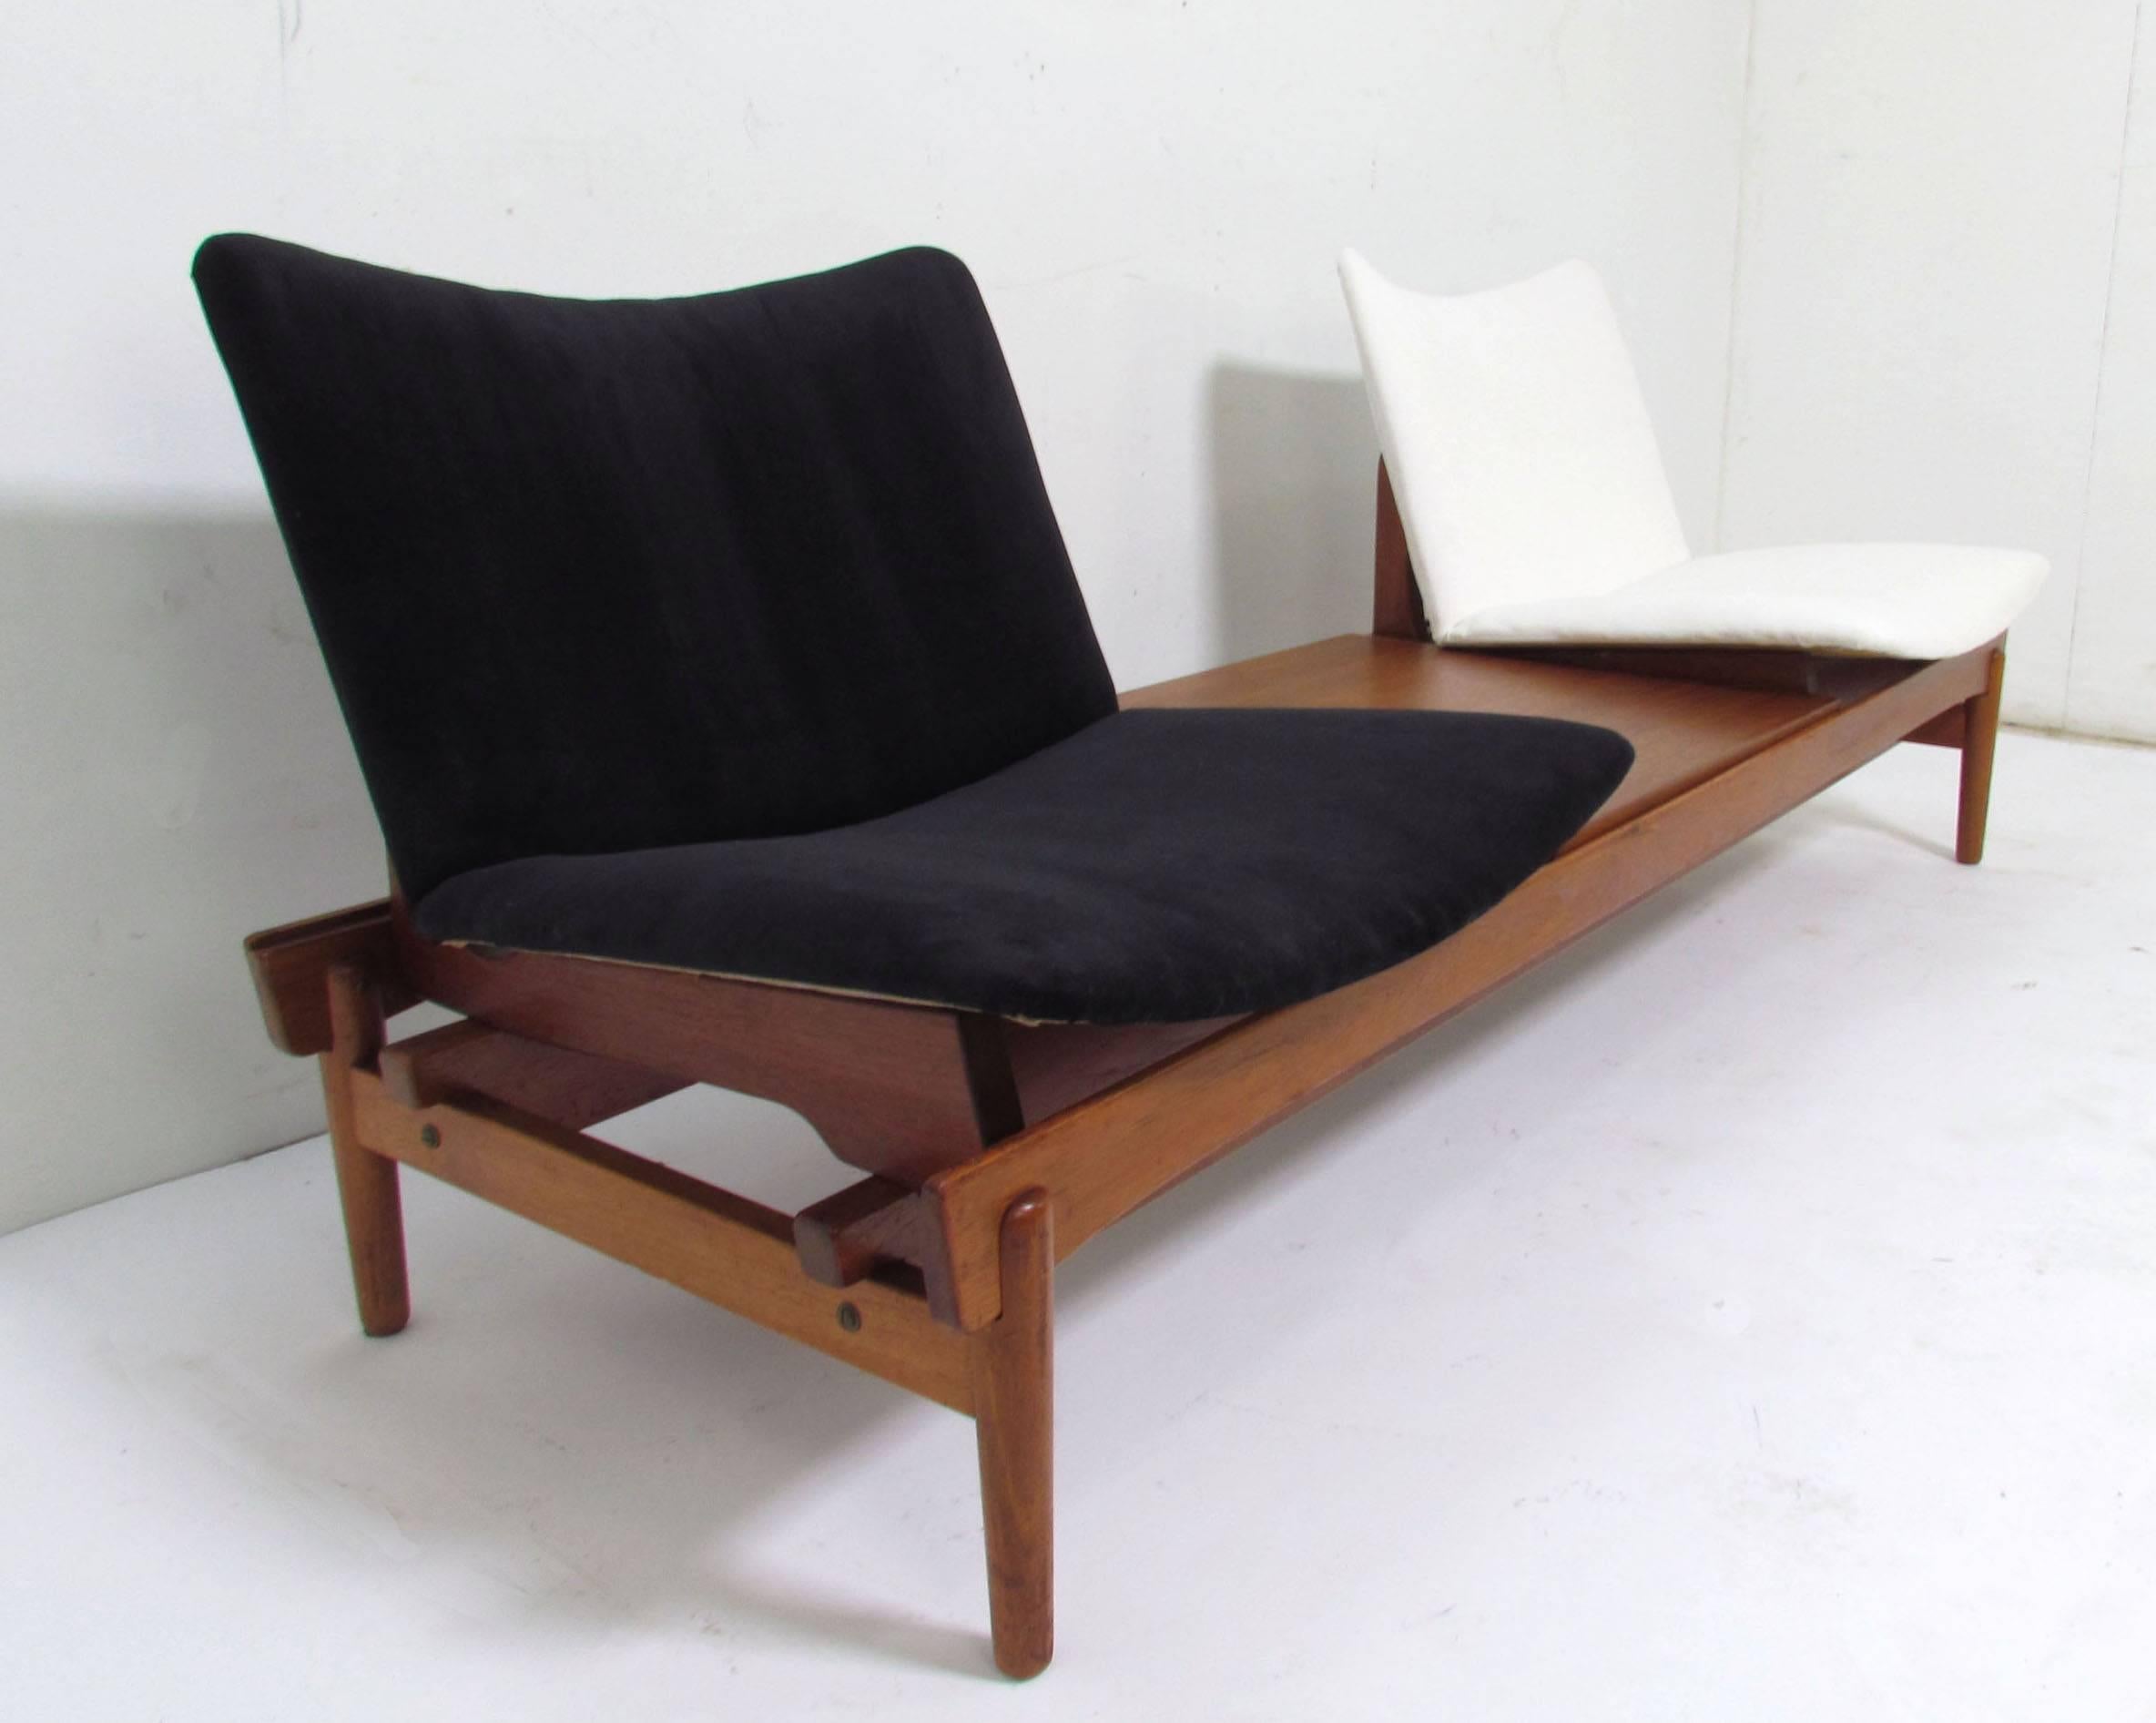 Scarce Danish two-seat sofa or bench designed by Hans Olsen for N.A. Jorgensens Mobelfabrik (Bramin), circa mid-1950s. Seats and tabletop can be reconfigured in various positions.